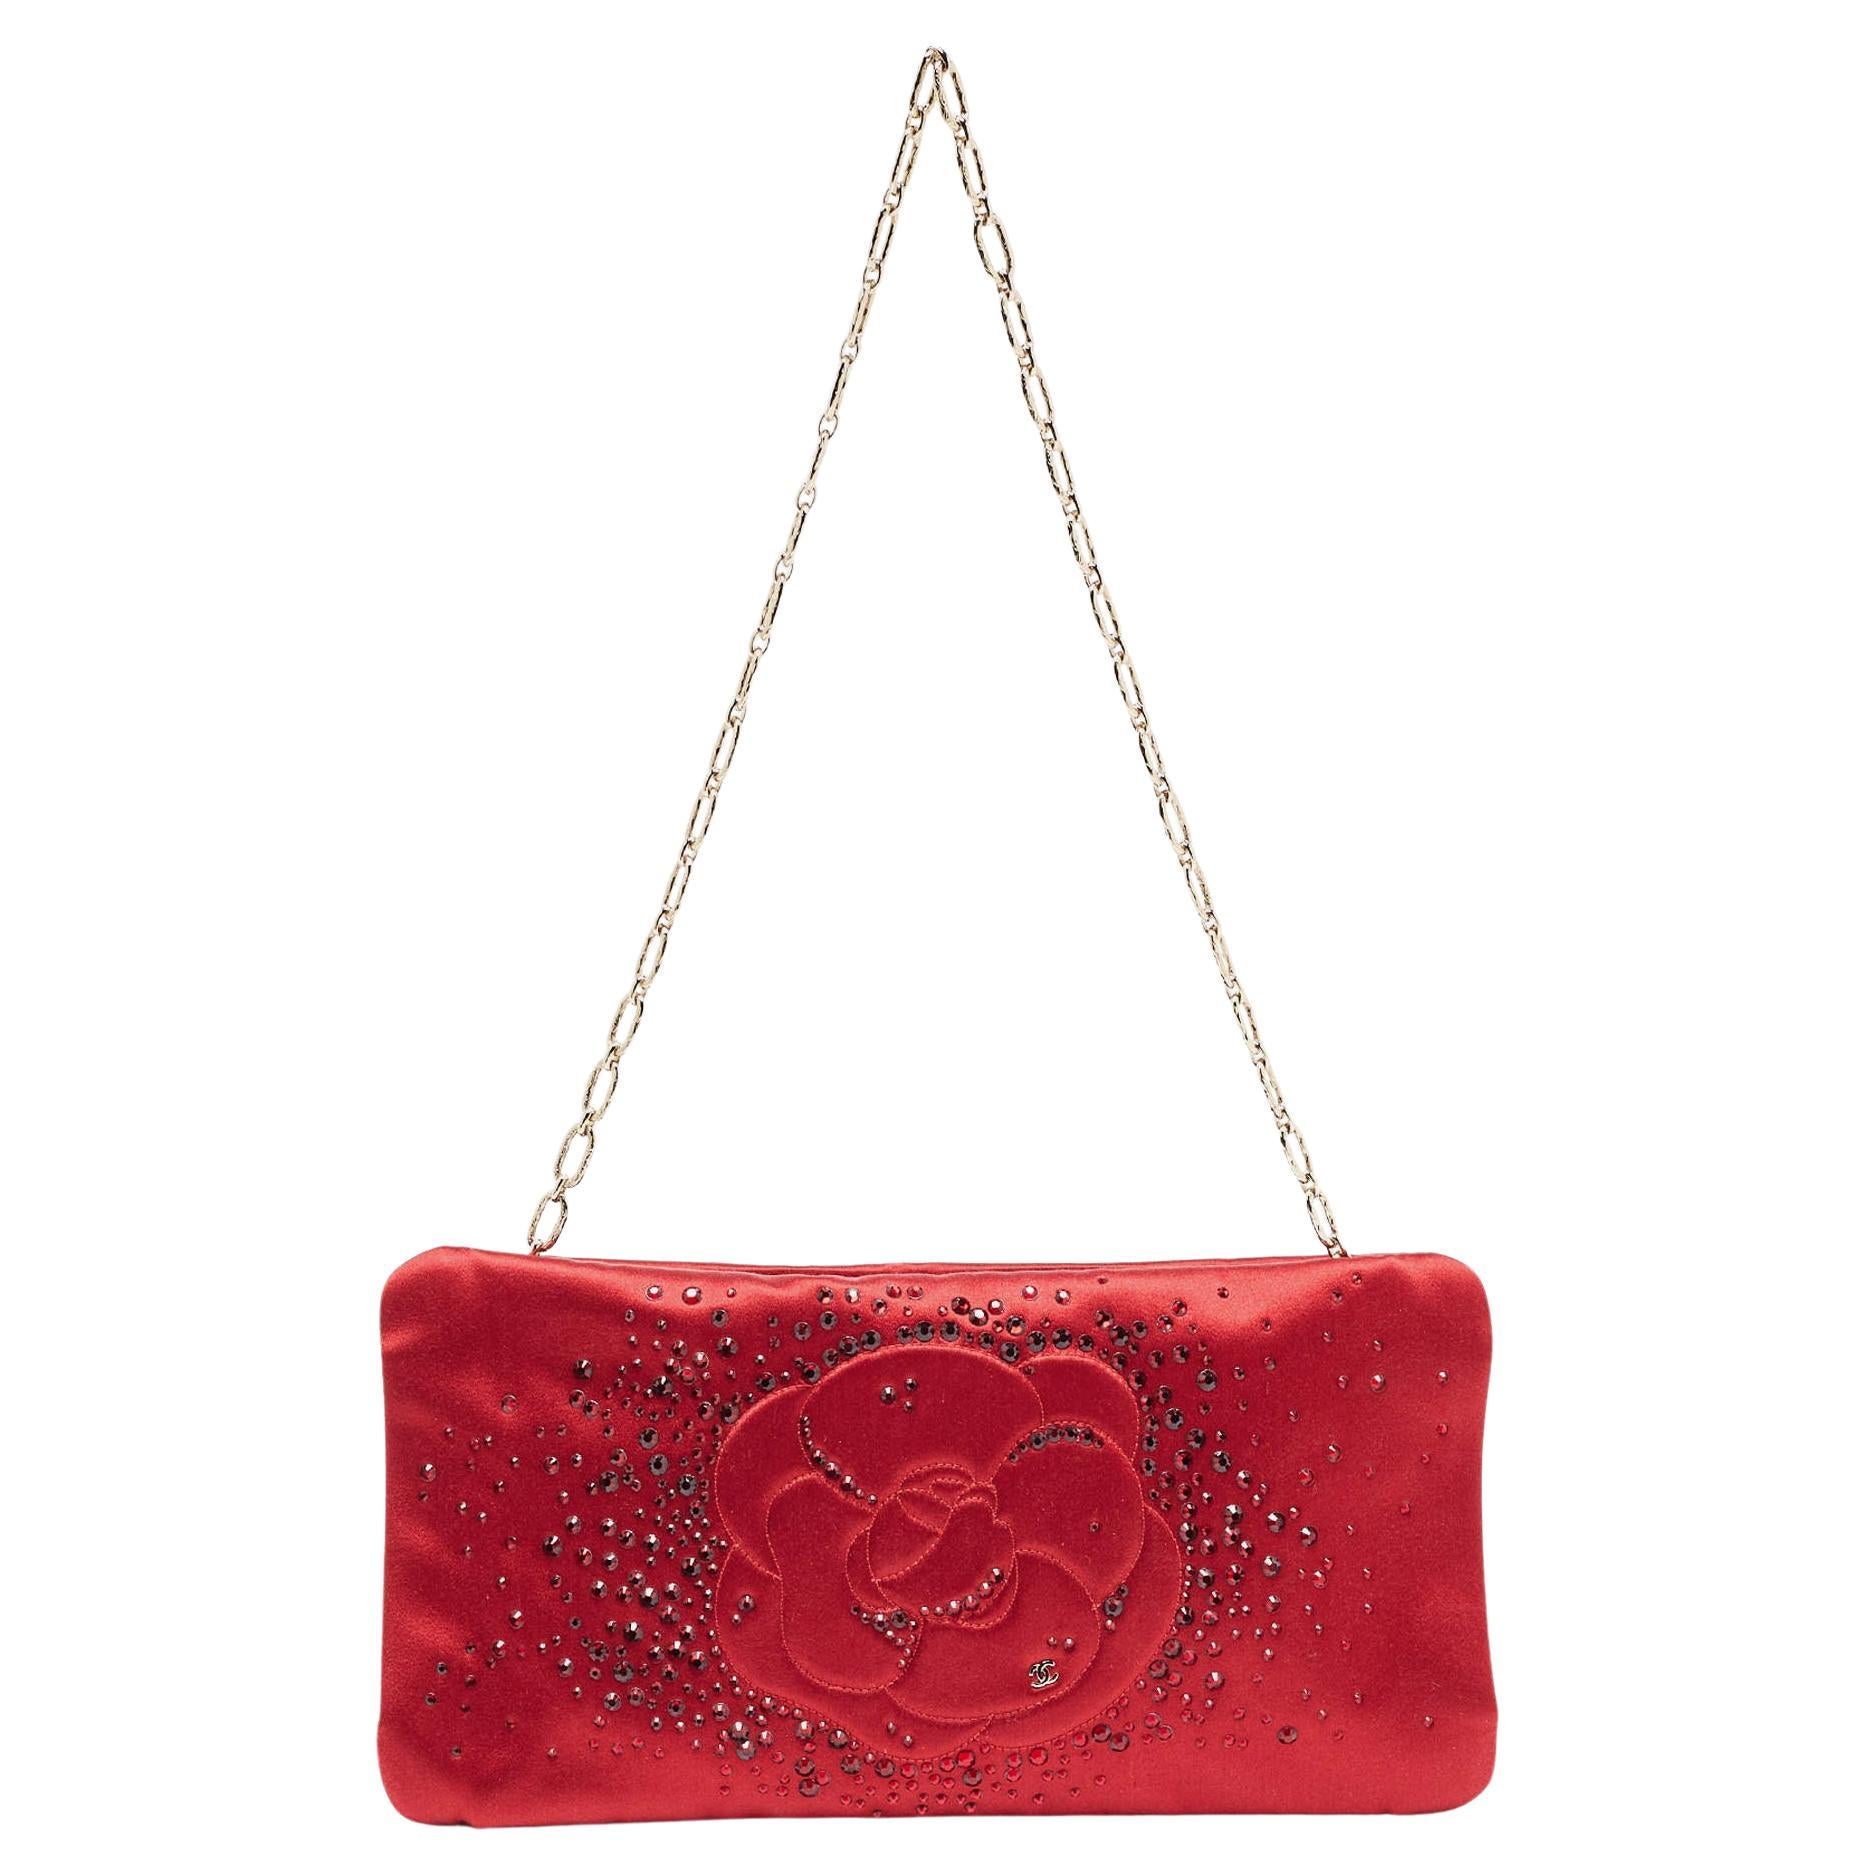 Chanel Red Satin Embellished Strass Camellia Chain Clutch